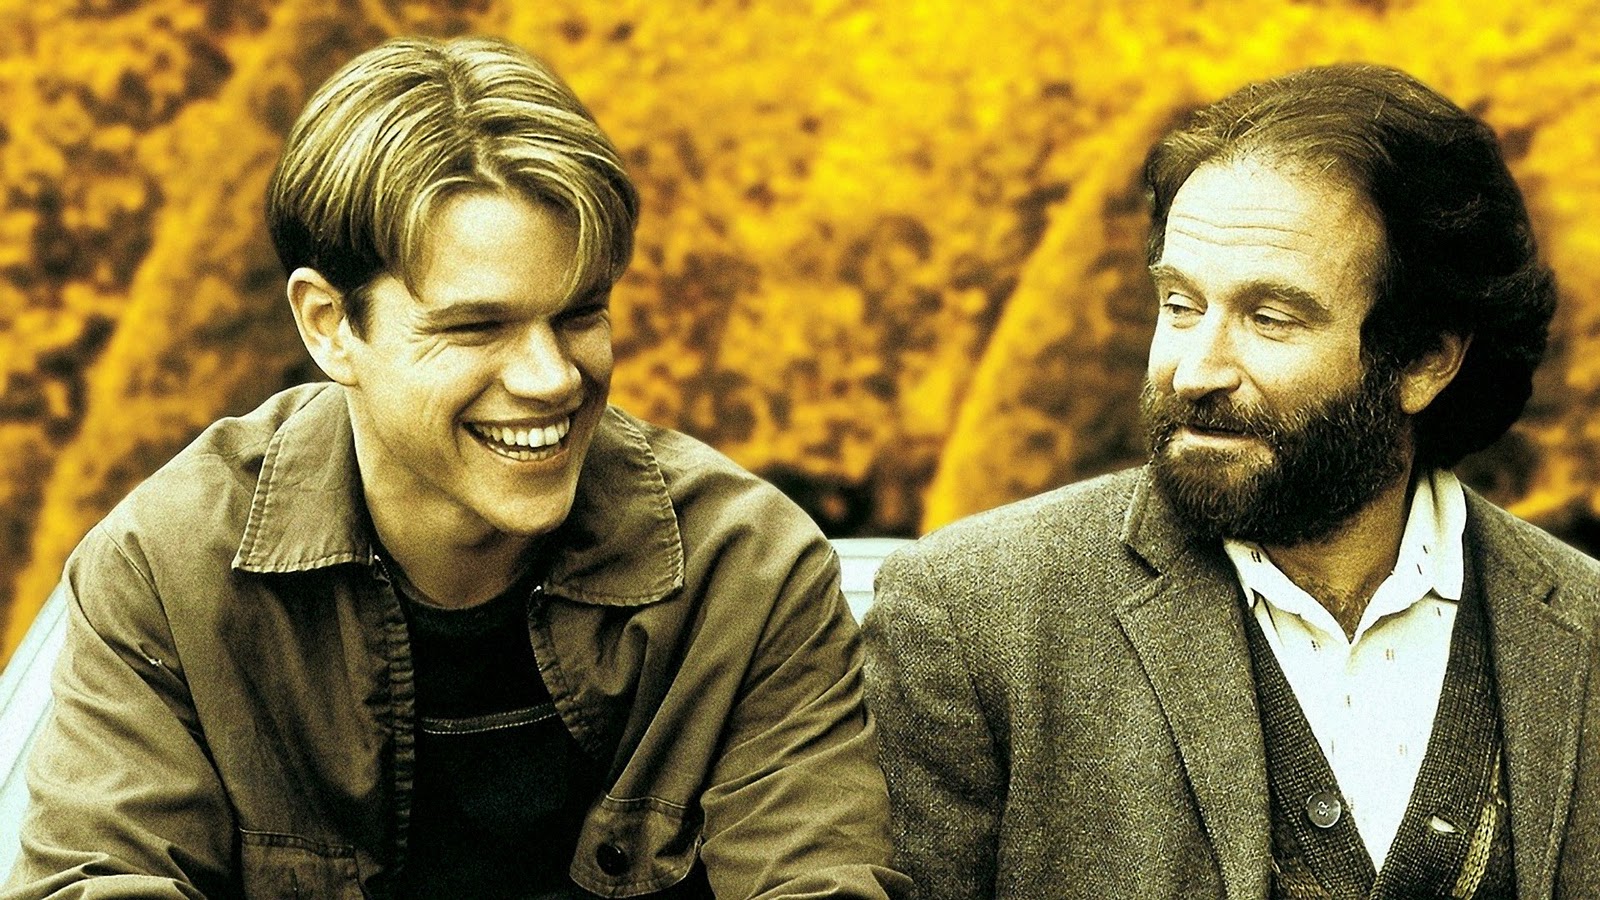 Good Will Hunting Backgrounds, Compatible - PC, Mobile, Gadgets| 1600x900 px